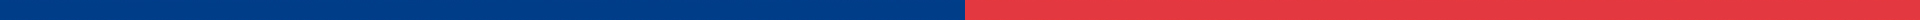 Blue and Red Design Element